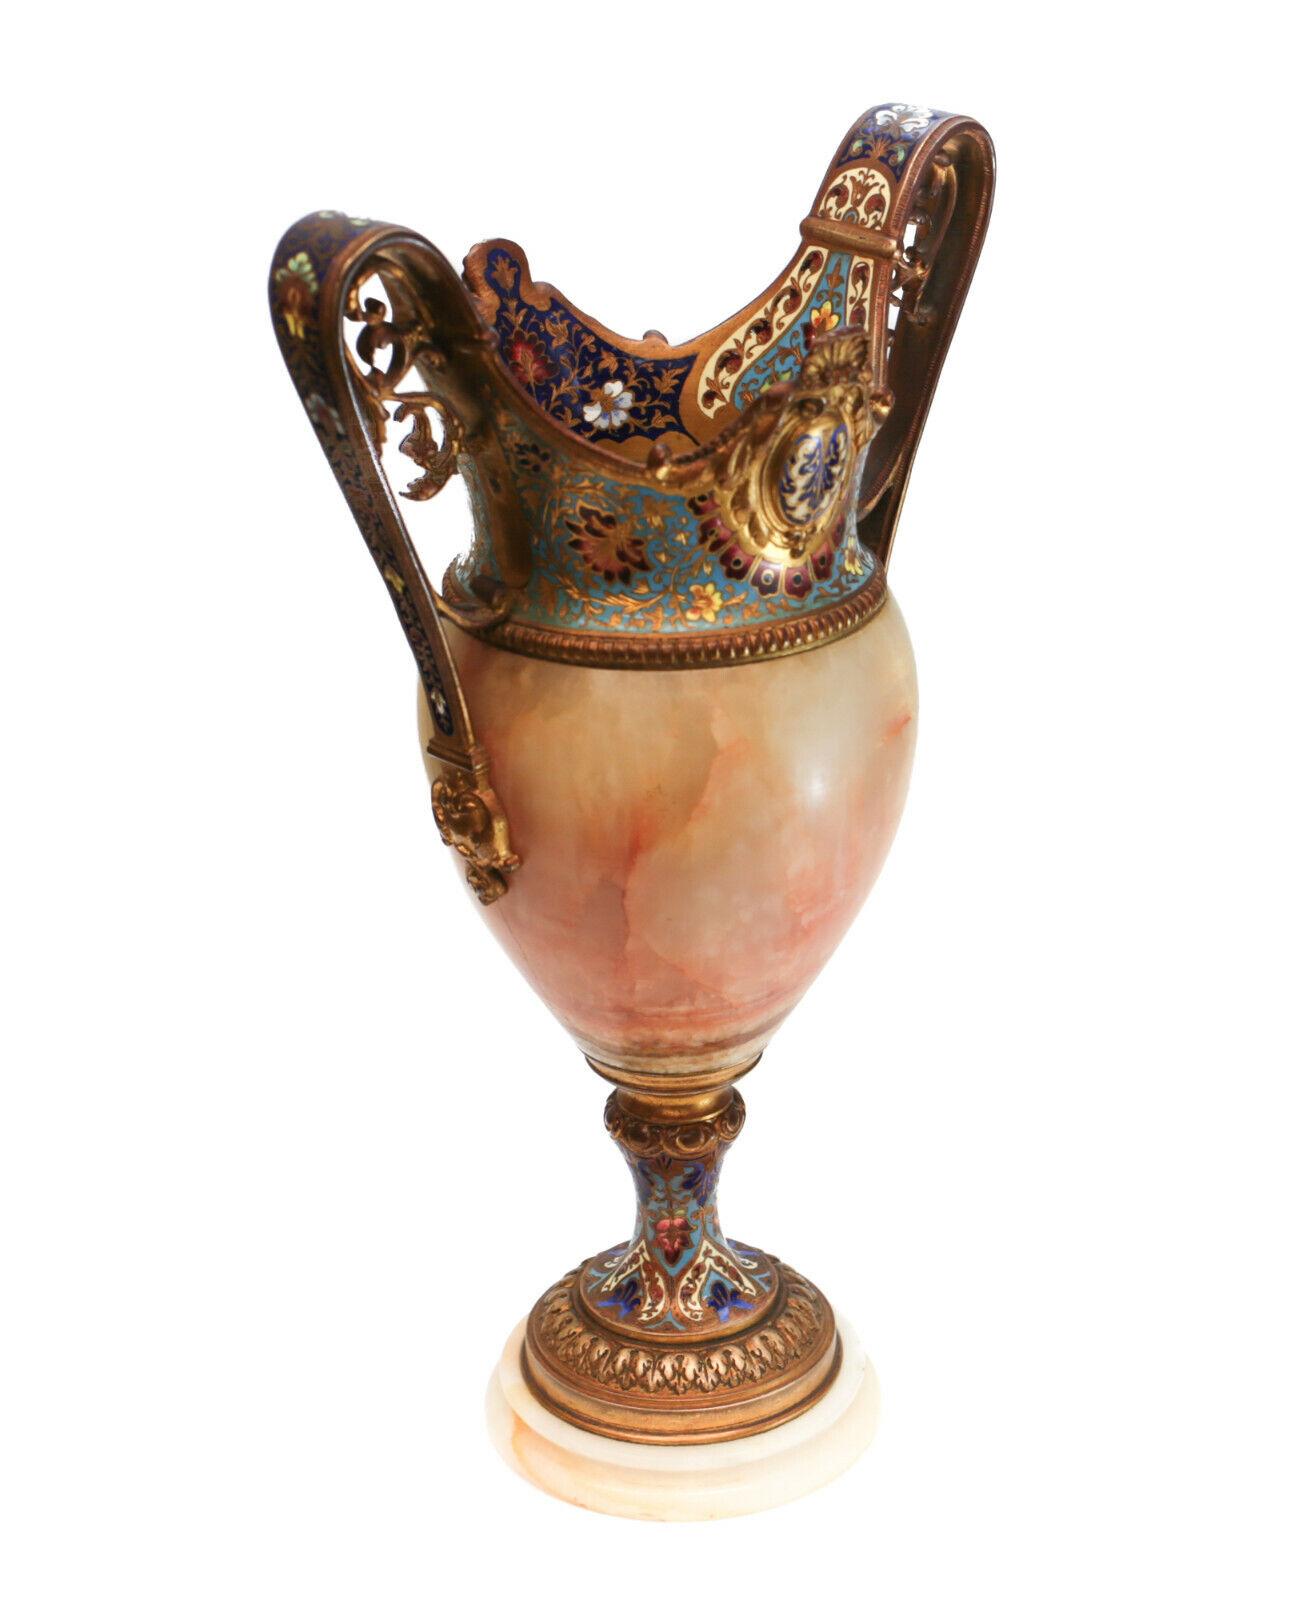 A Fine French champleve enamel and white onyx double-handled vase, 19th Century. Beautiful enamel florals throughout the gilt bronze with beaded accents. 

Additional information:
Style: French 
Age:19th Century
Type: Vases
Dimension: 7 inches